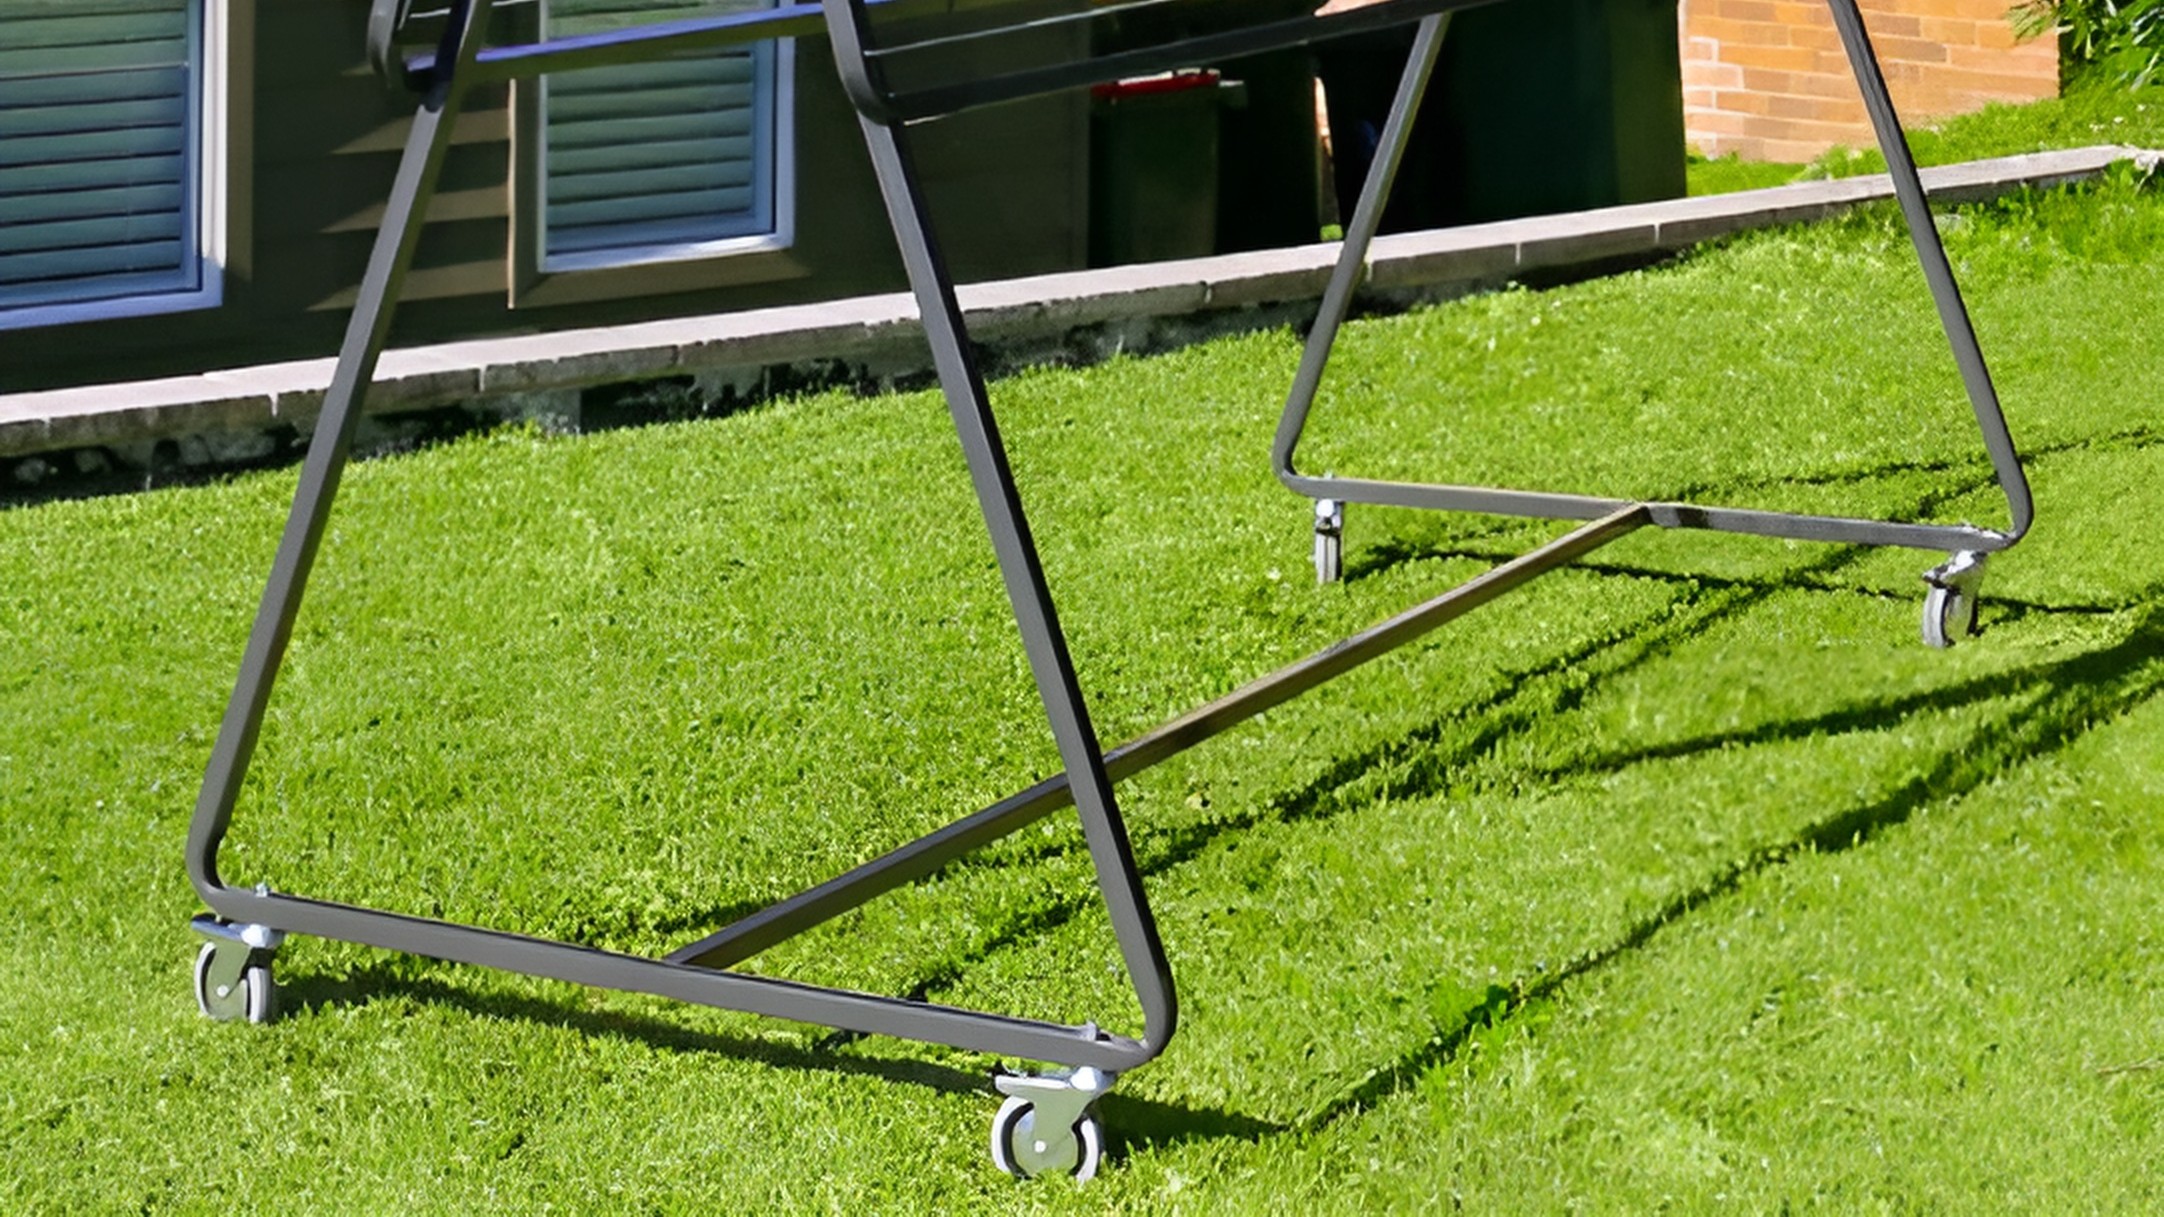 Sunchaser Mobile Clothesline Adaptability for Small Living Spaces